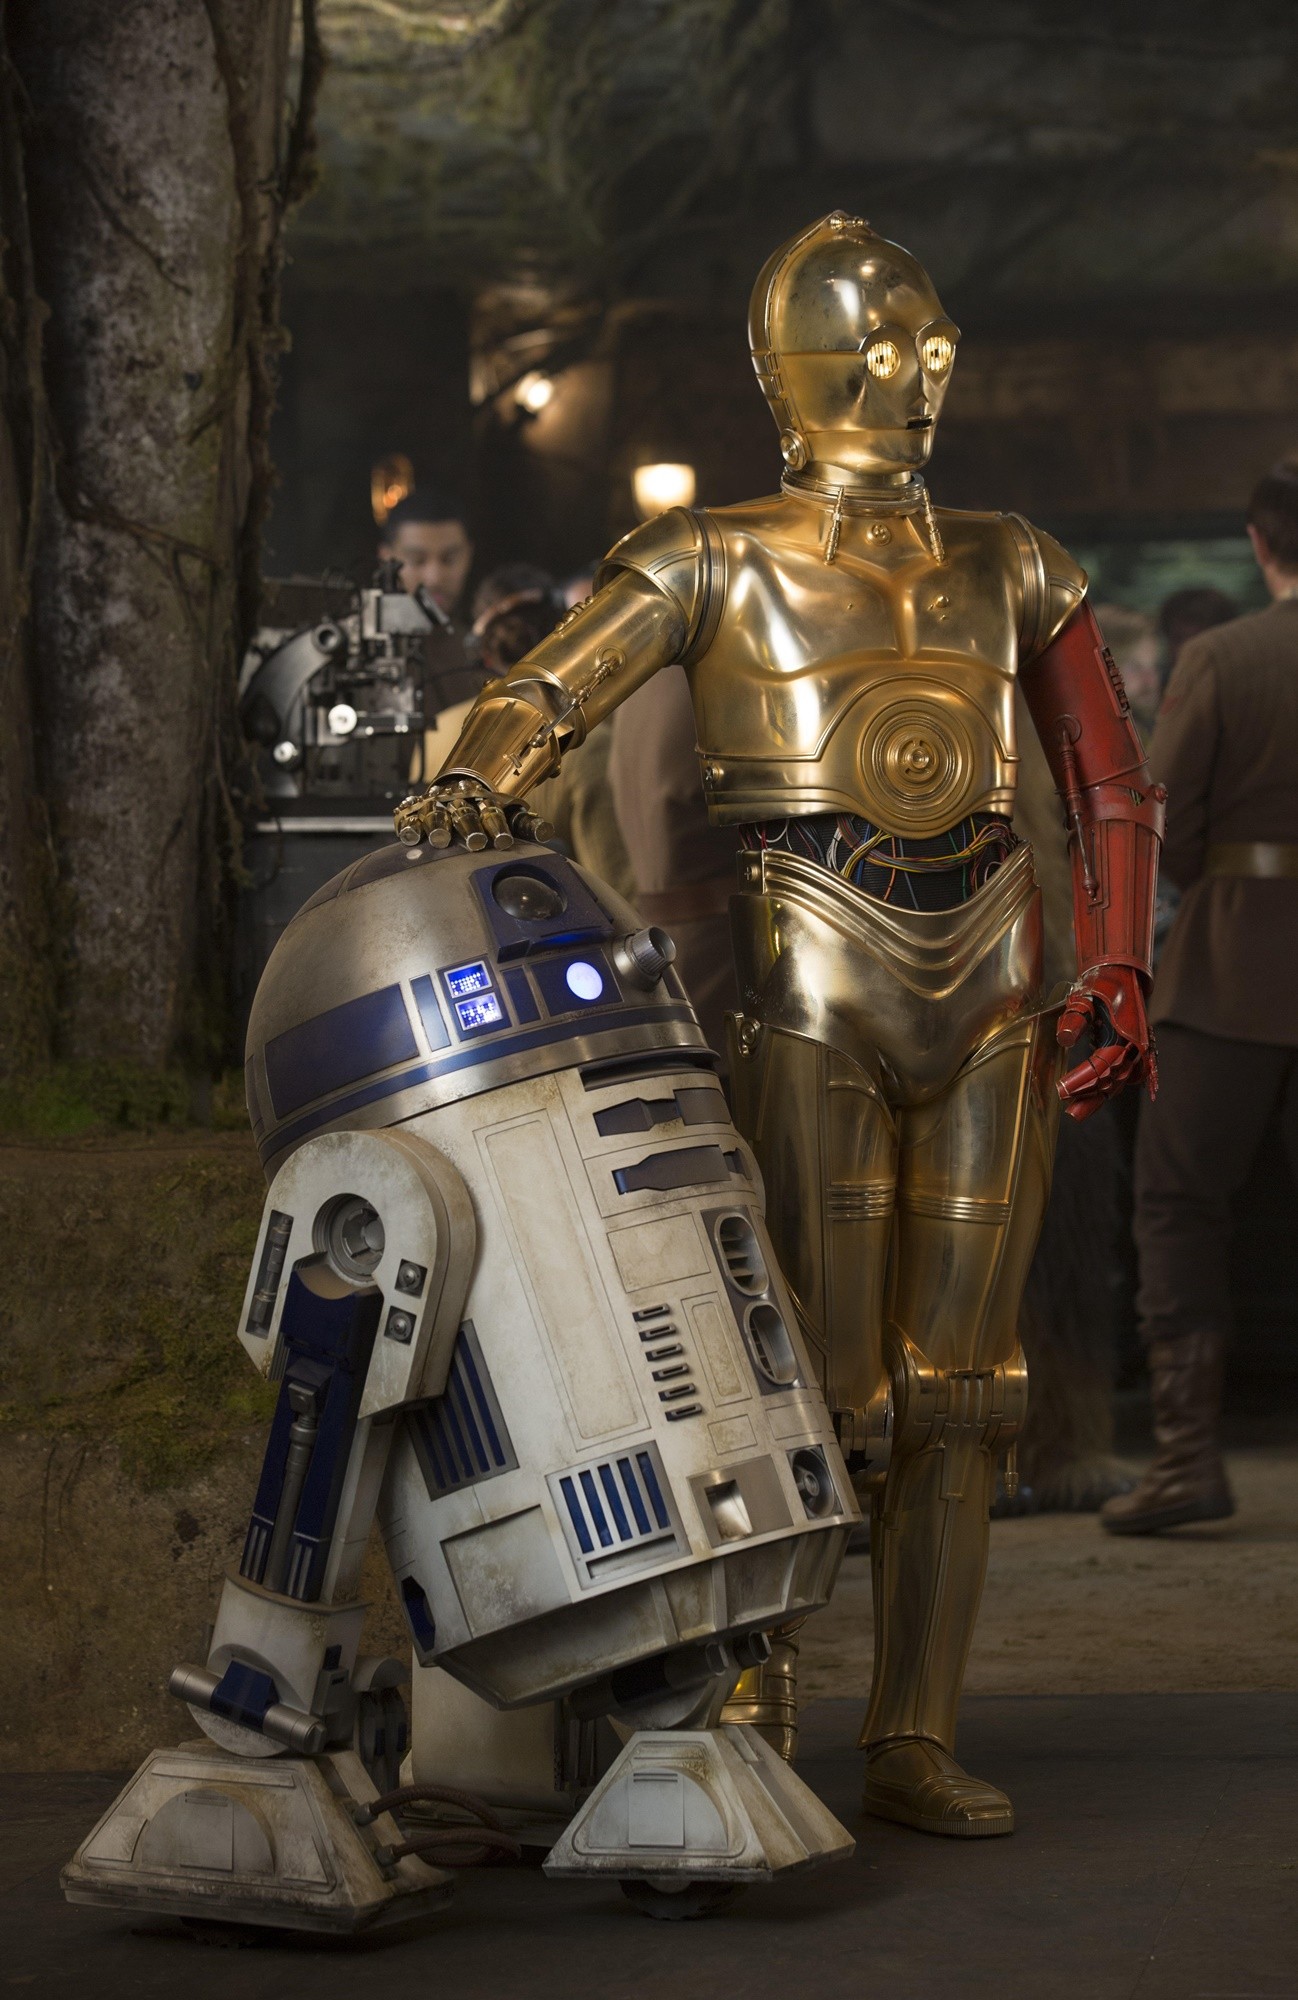 R2-D2 and C-3PO from Walt Disney Pictures' Star Wars: The Force Awakens (2015)